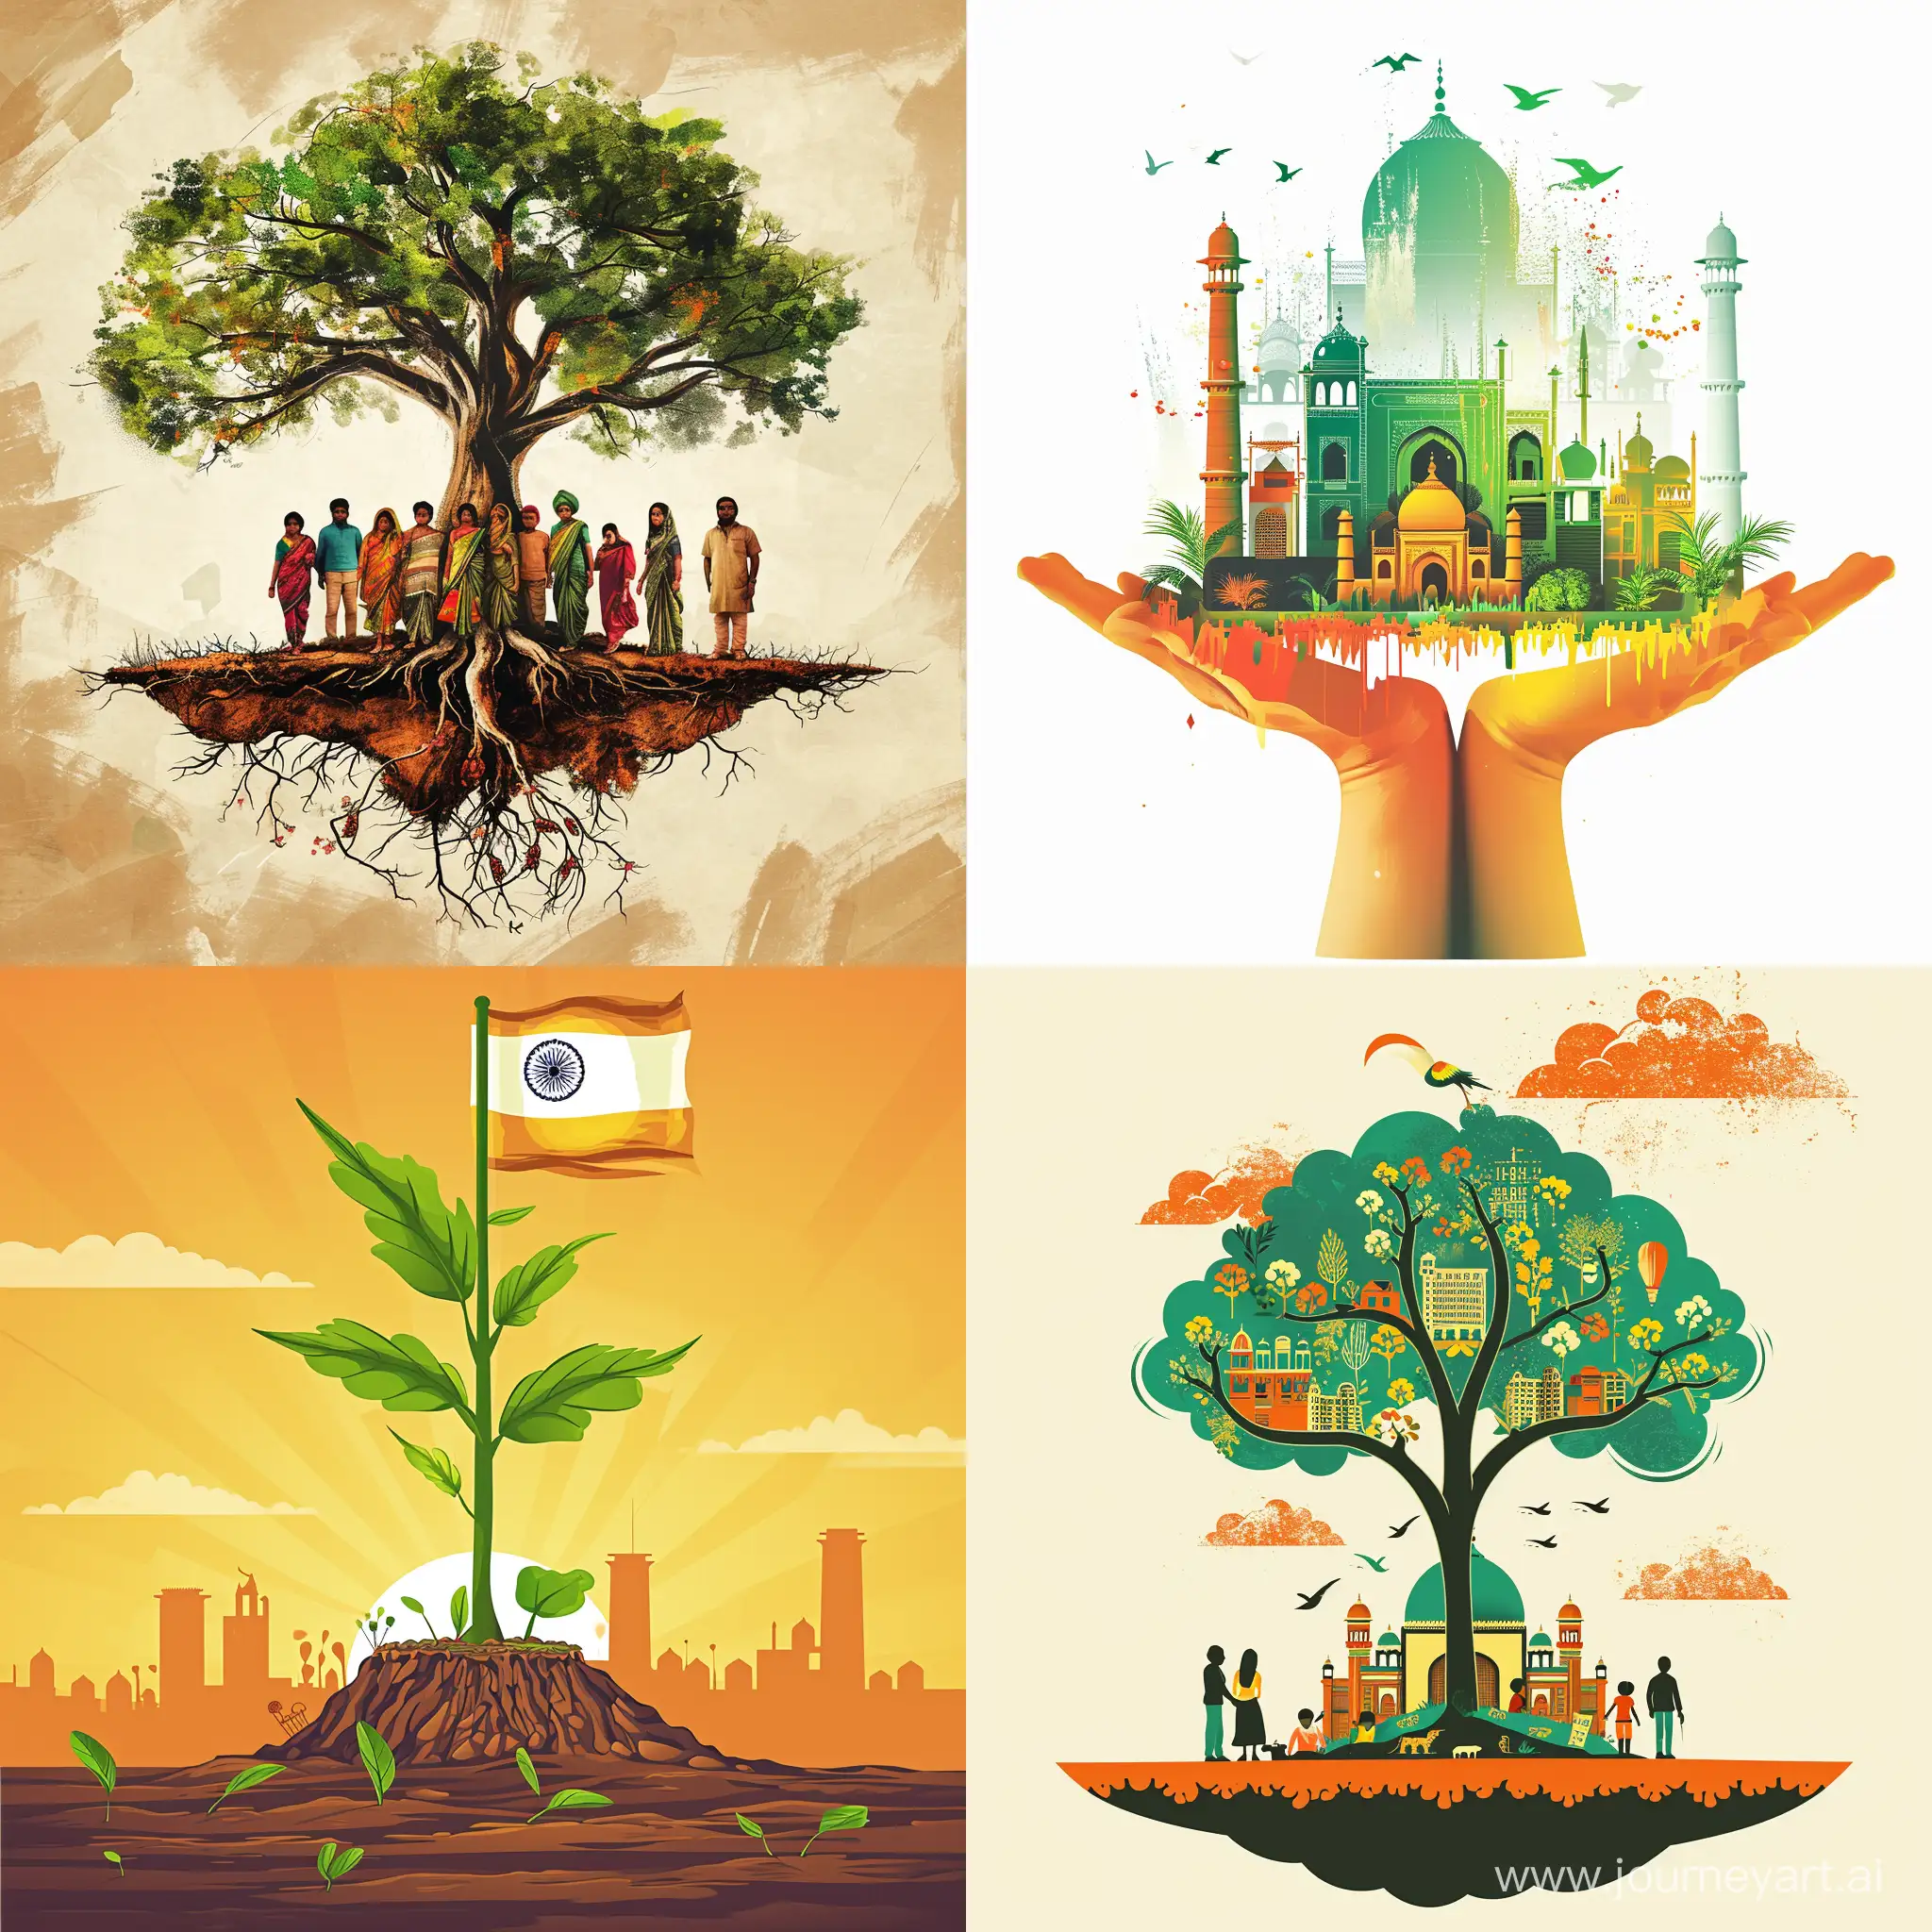 Viksit bharat, Growing India with harmony, poster, a new skilled and growing India